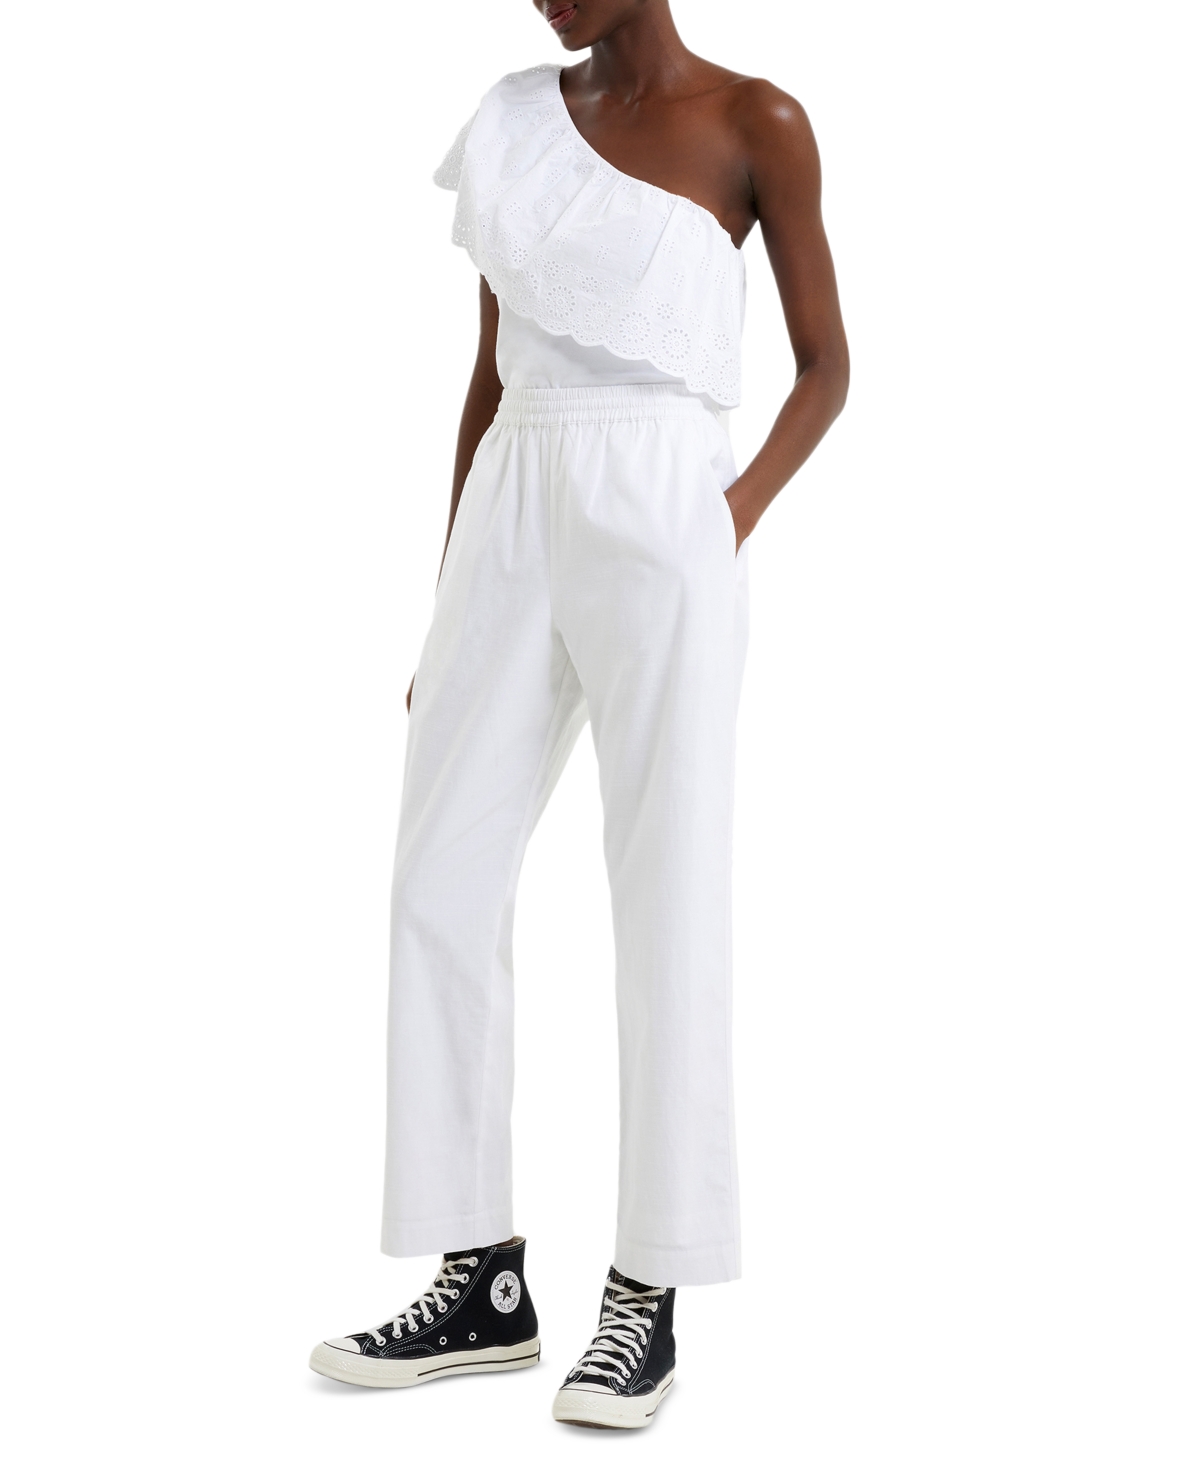 Women's Alania Pull-On Relaxed Pants - Linen White